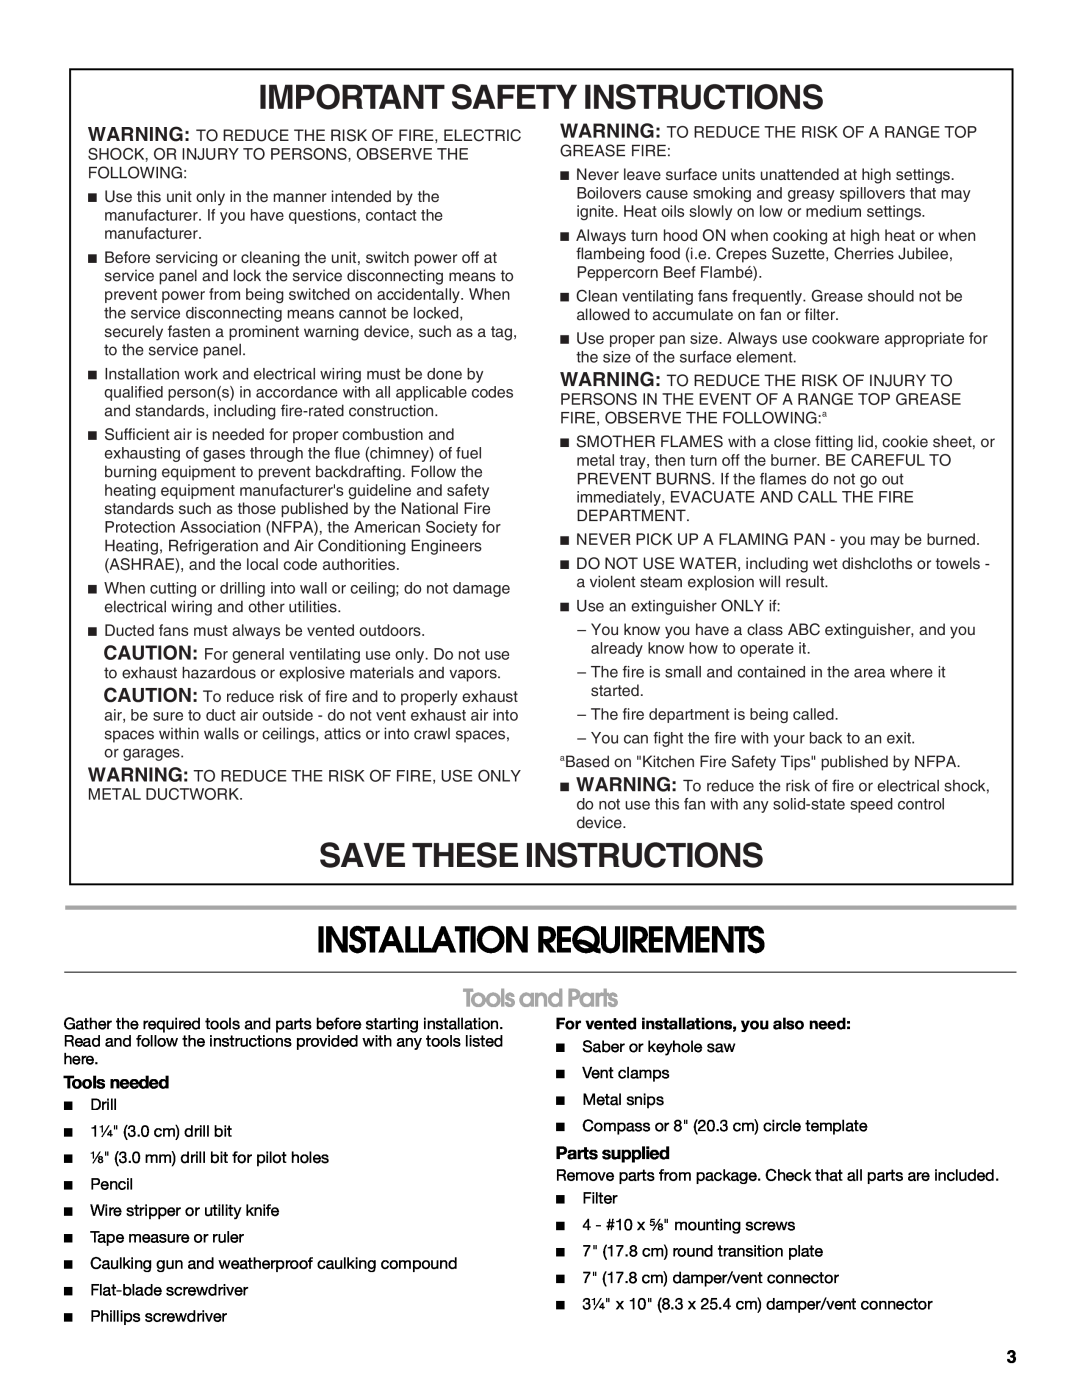 Whirlpool 99044504A Installation Requirements, Important Safety Instructions, Save These Instructions, Tools and Parts 